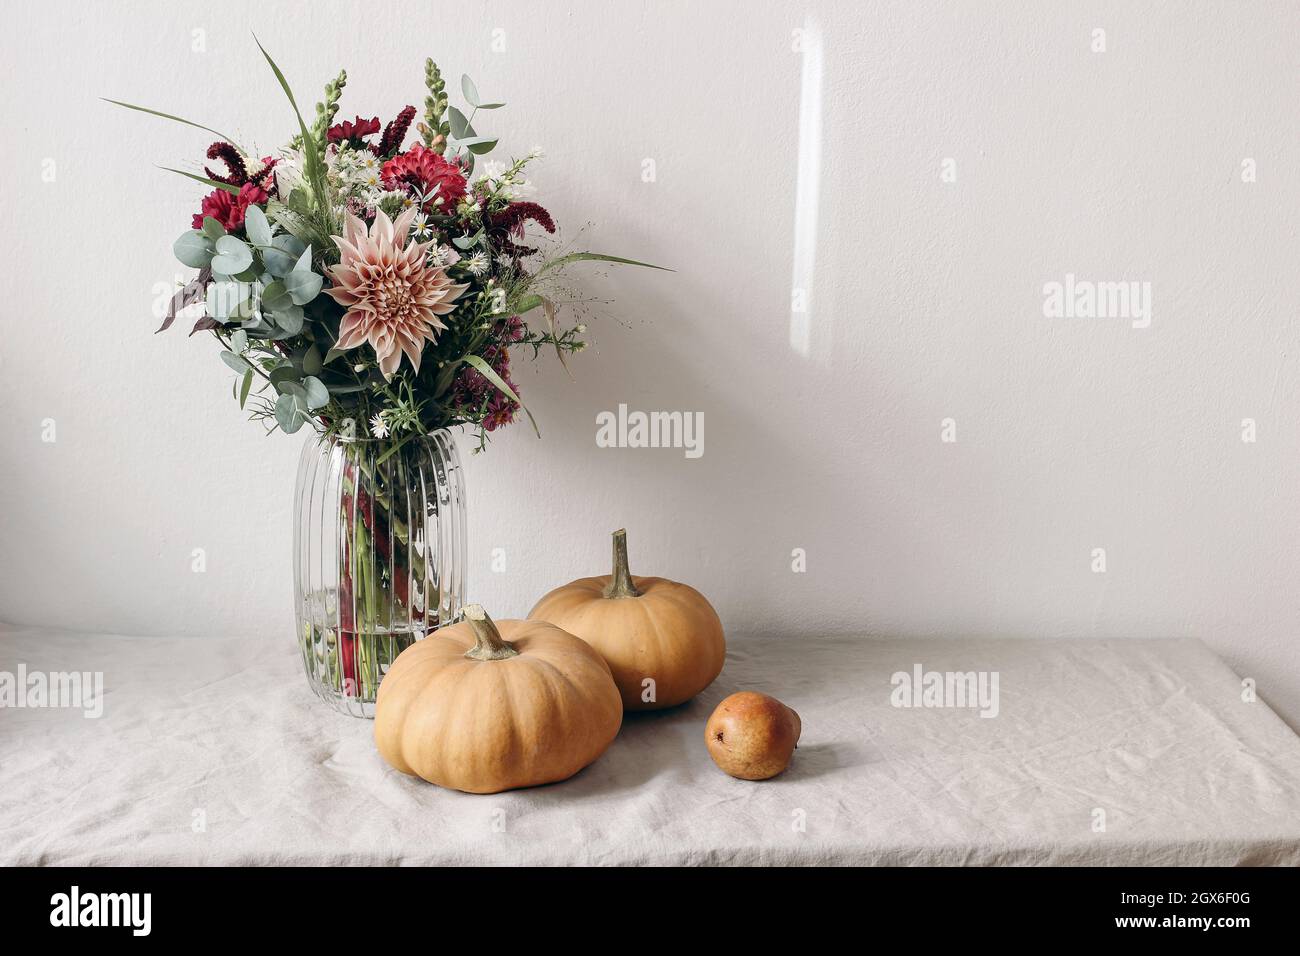 Autumn still life scene. Orange pumkins, pear fruit on linen table cloth in sunlight. Floral bouquet of dahlia flowers, cosmos and eucalyptus in glass Stock Photo